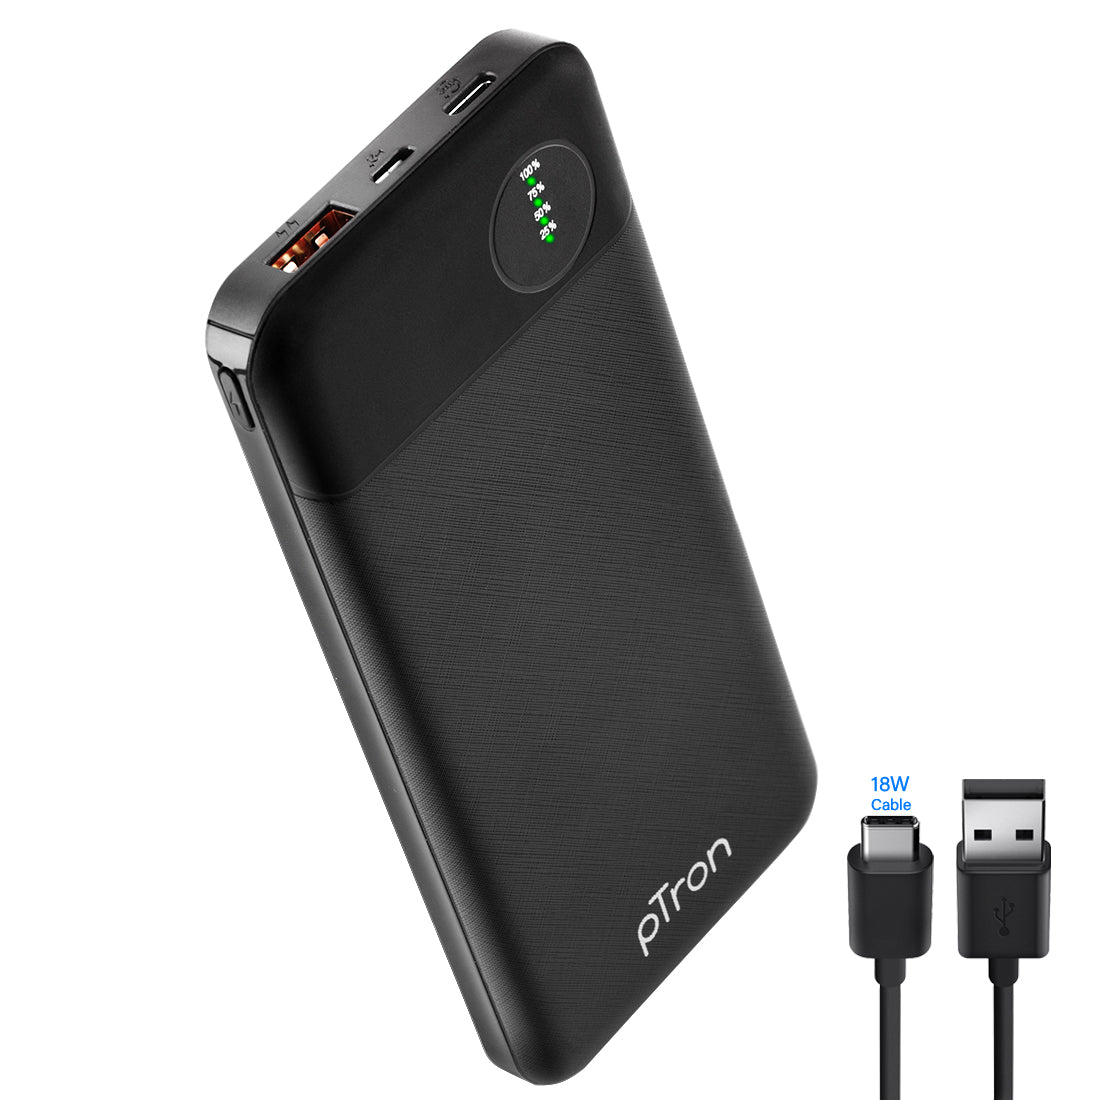 pTron Dynamo Pro 10000mAh 18W QC3.0 PD Power Bank, Made in India, Fast -  pTron India